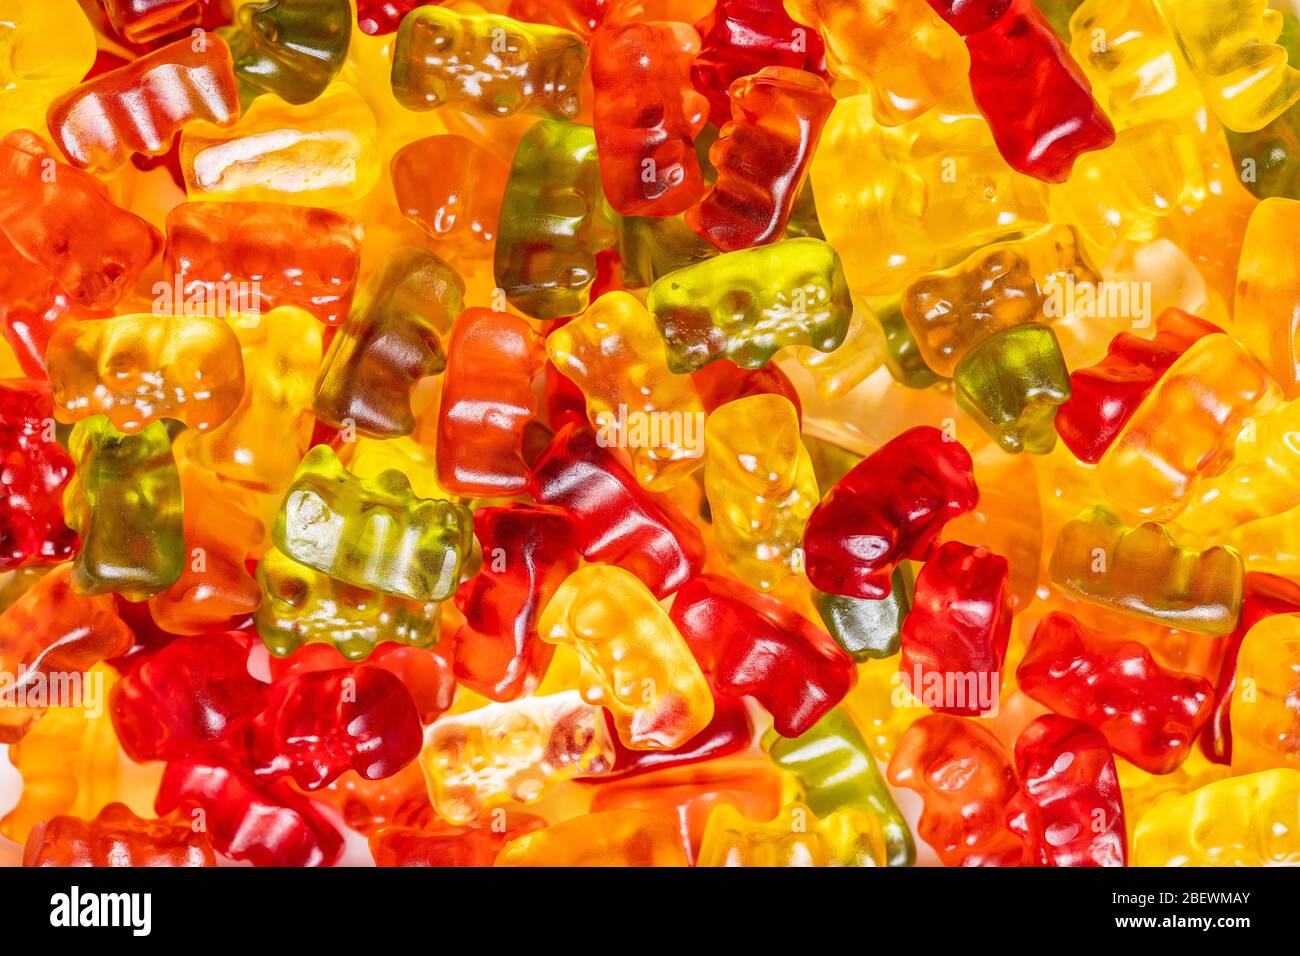 Gummy bears, jelly candy. Colorful bonbons. Stock Photo